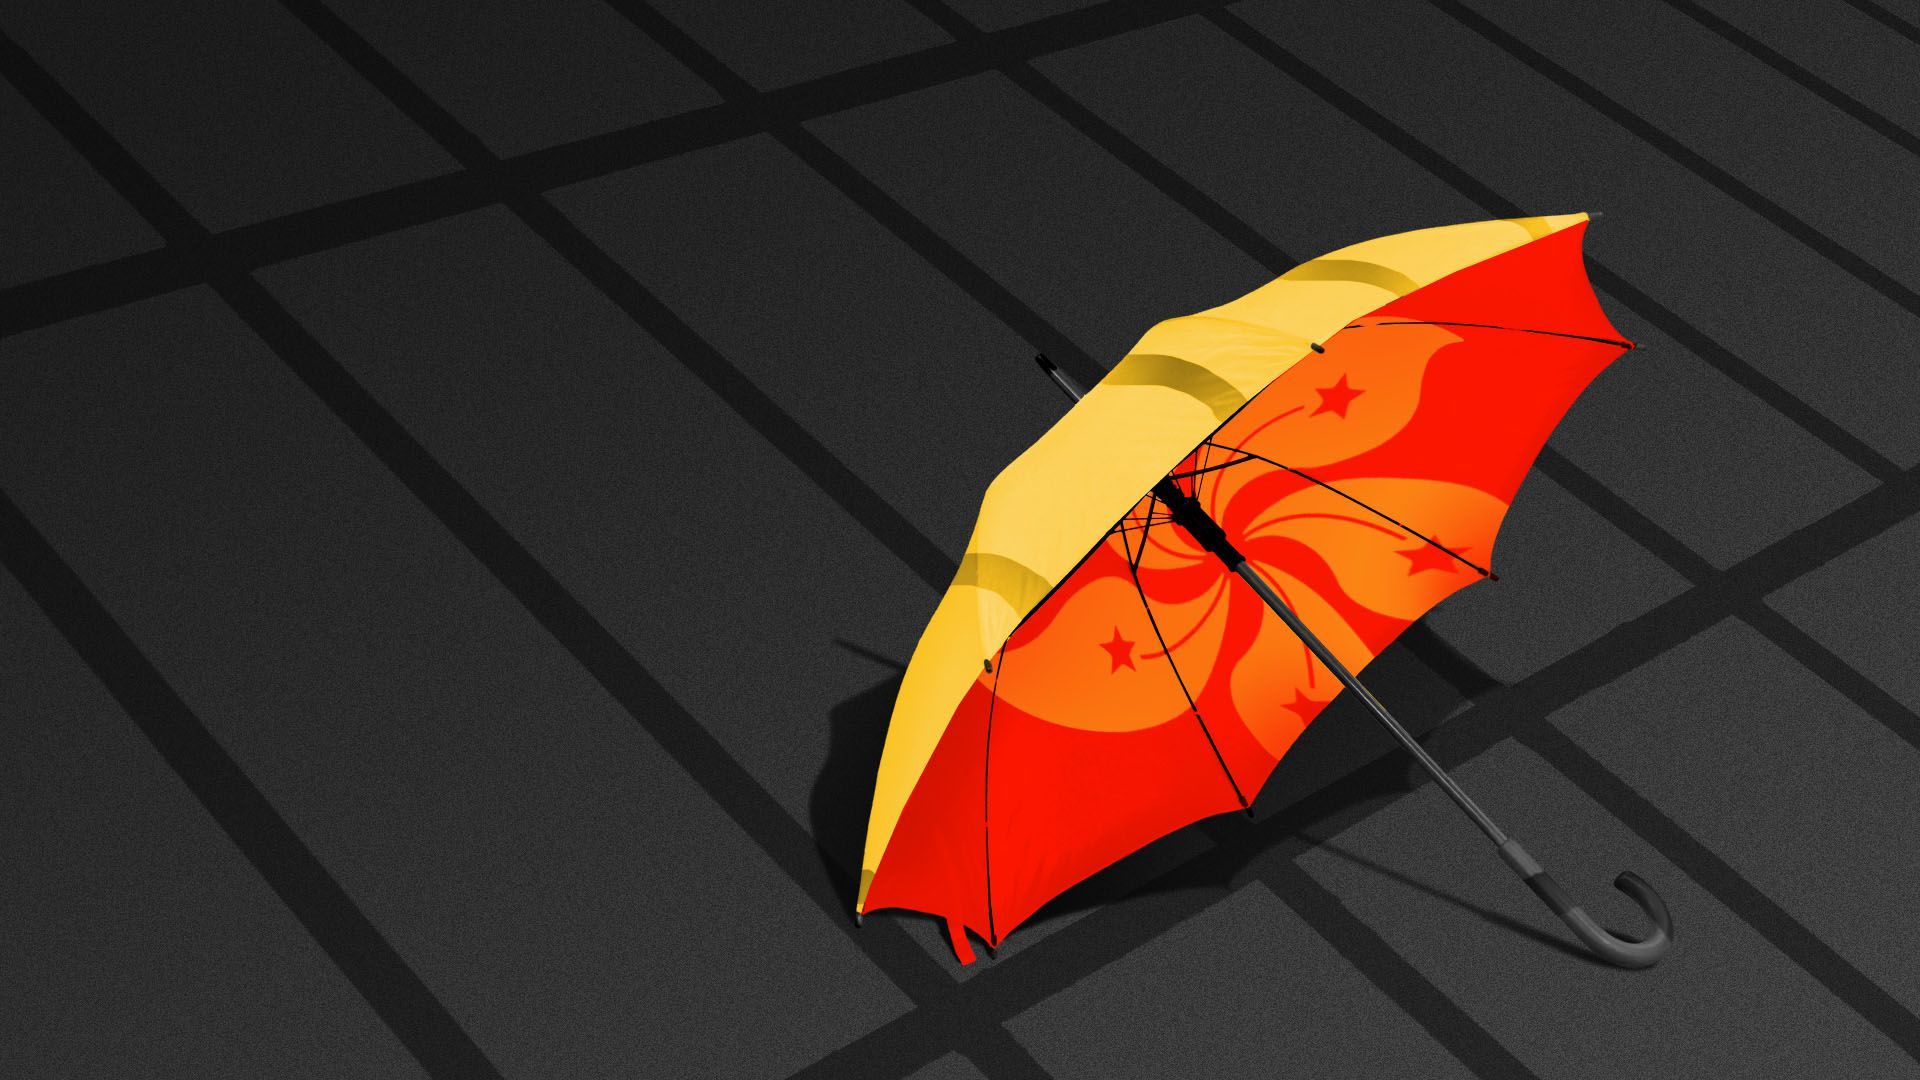 Illustration of jail bar shadows being cast onto a yellow umbrella with the flag of Hong Kong on it 